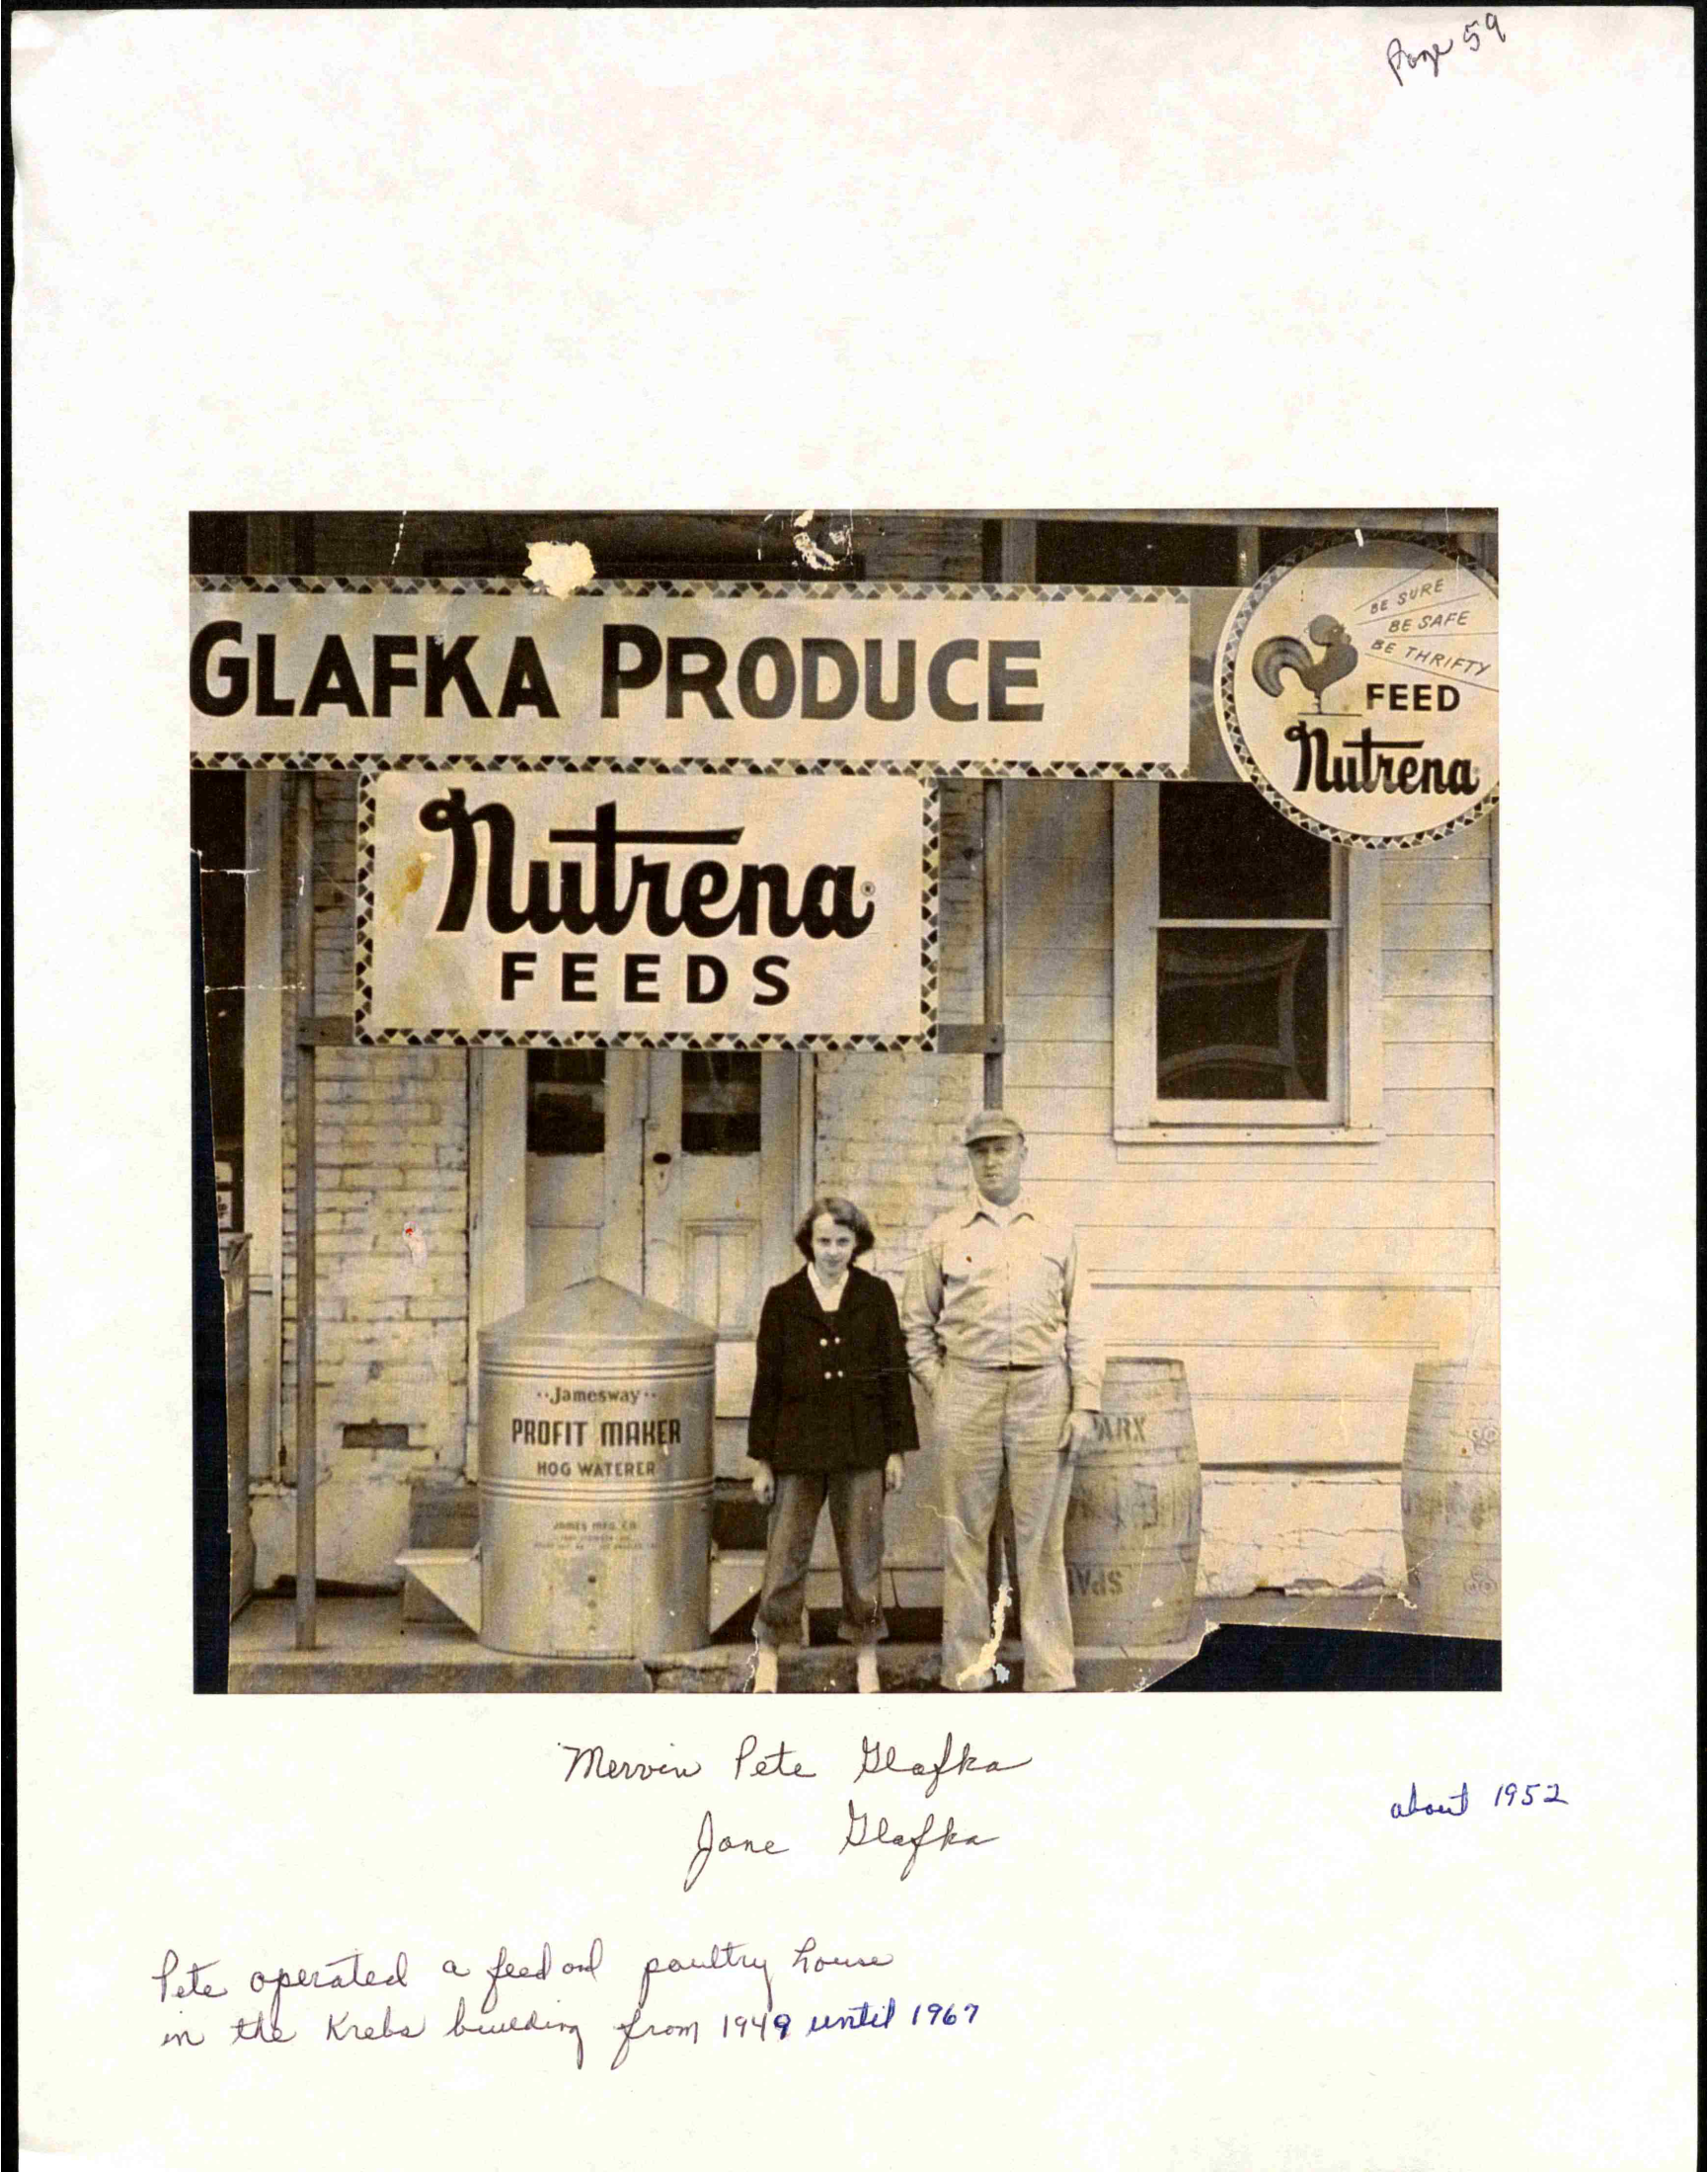 Album 1B MANLIUS NORTH SIDE, NELSON AND MAIN STREET Page 134